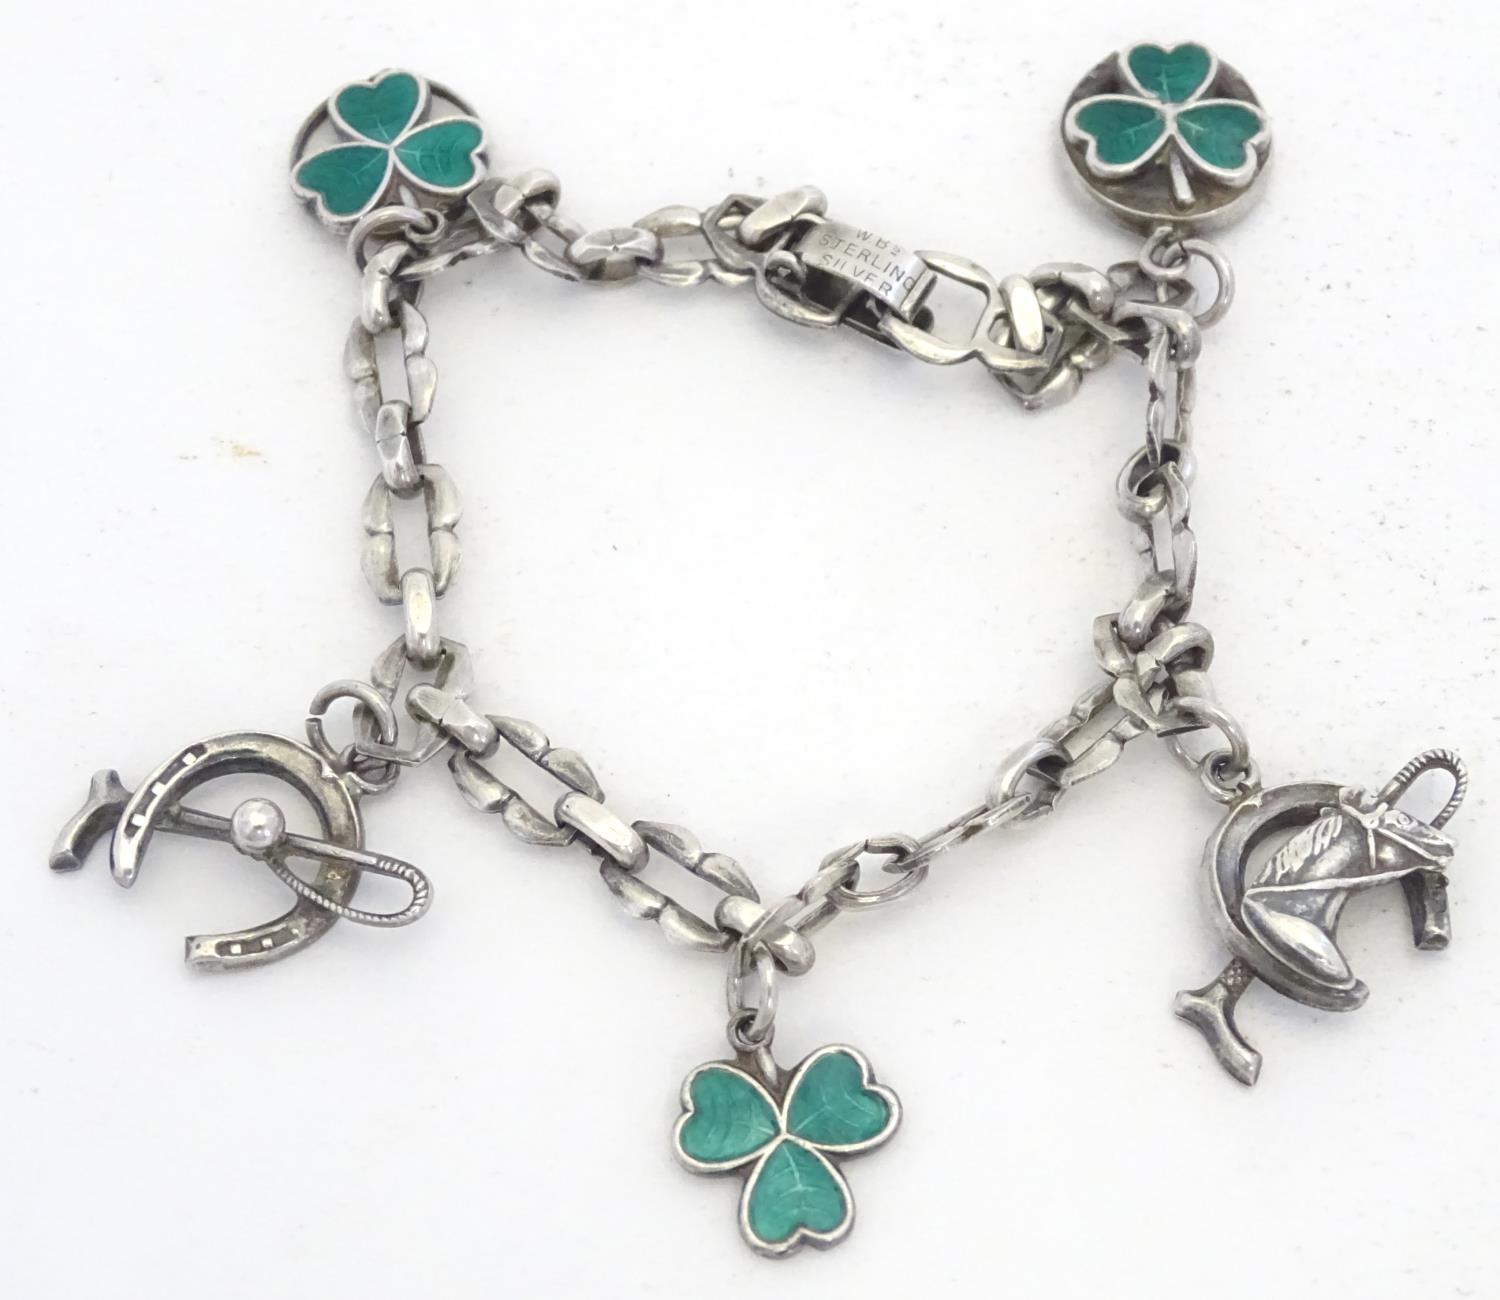 A silver charm bracelet set with various charms including horseshoe, horsehead and horseshoe and